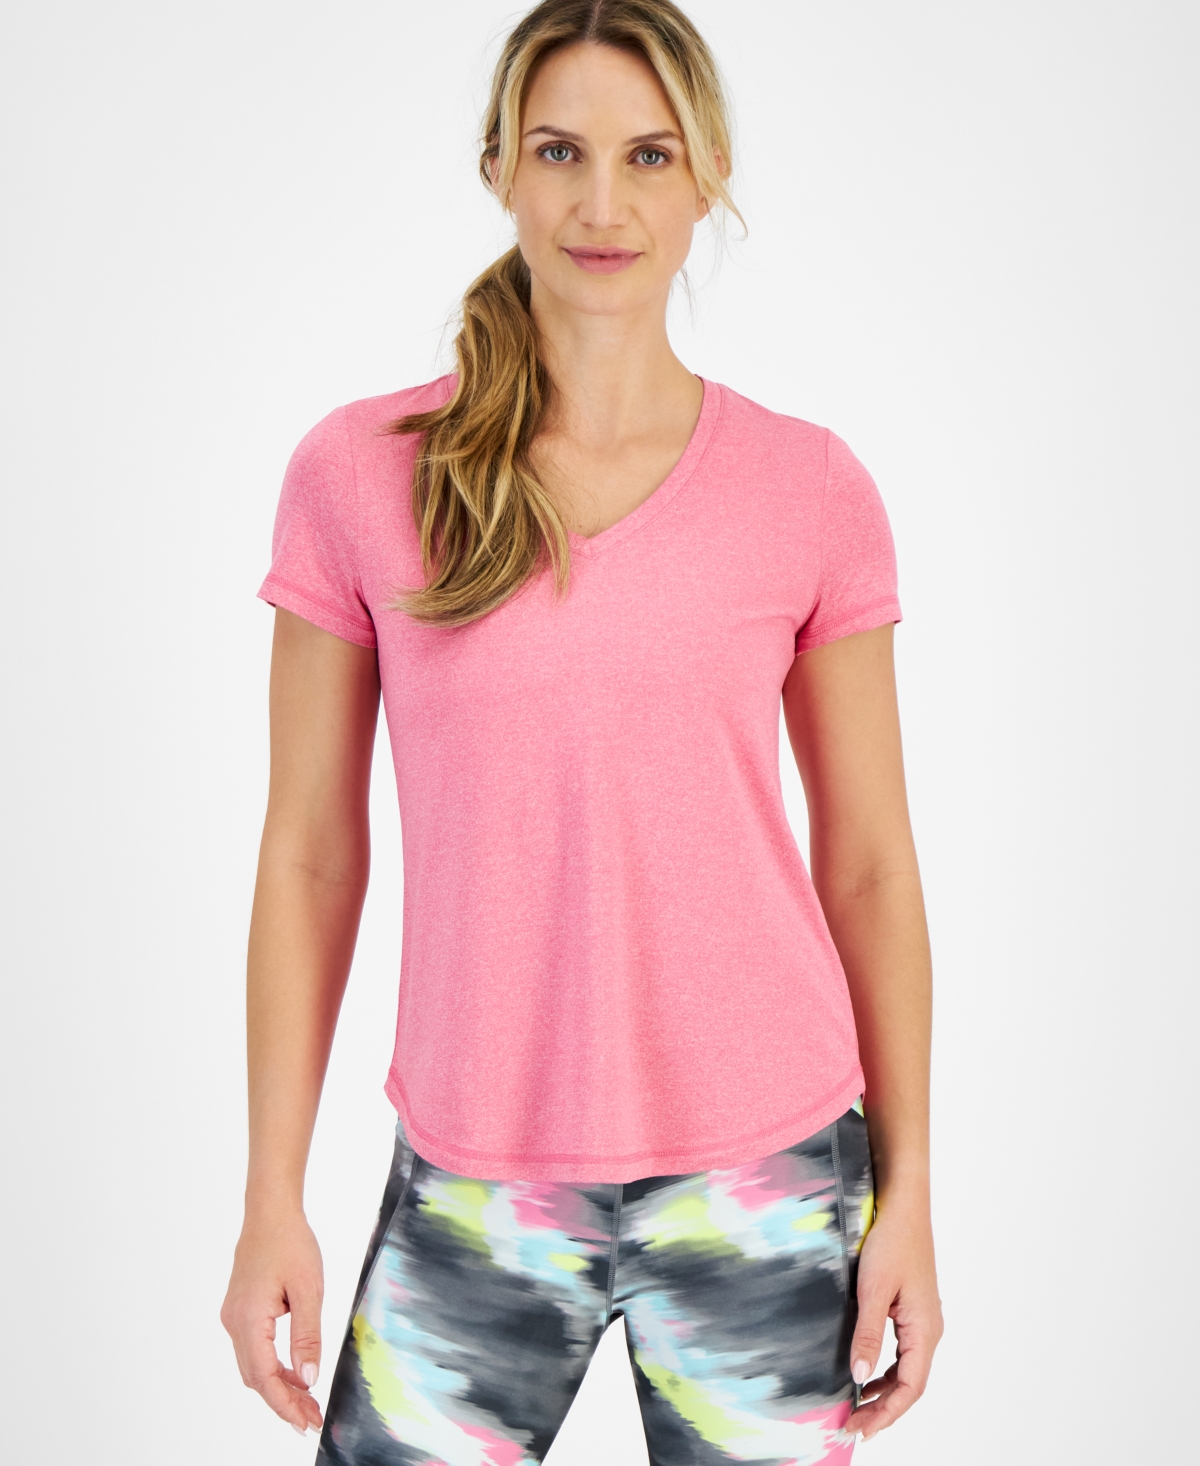 Women's V-Neck Performance T-Shirt, Created for Macy's - Pink Dragon